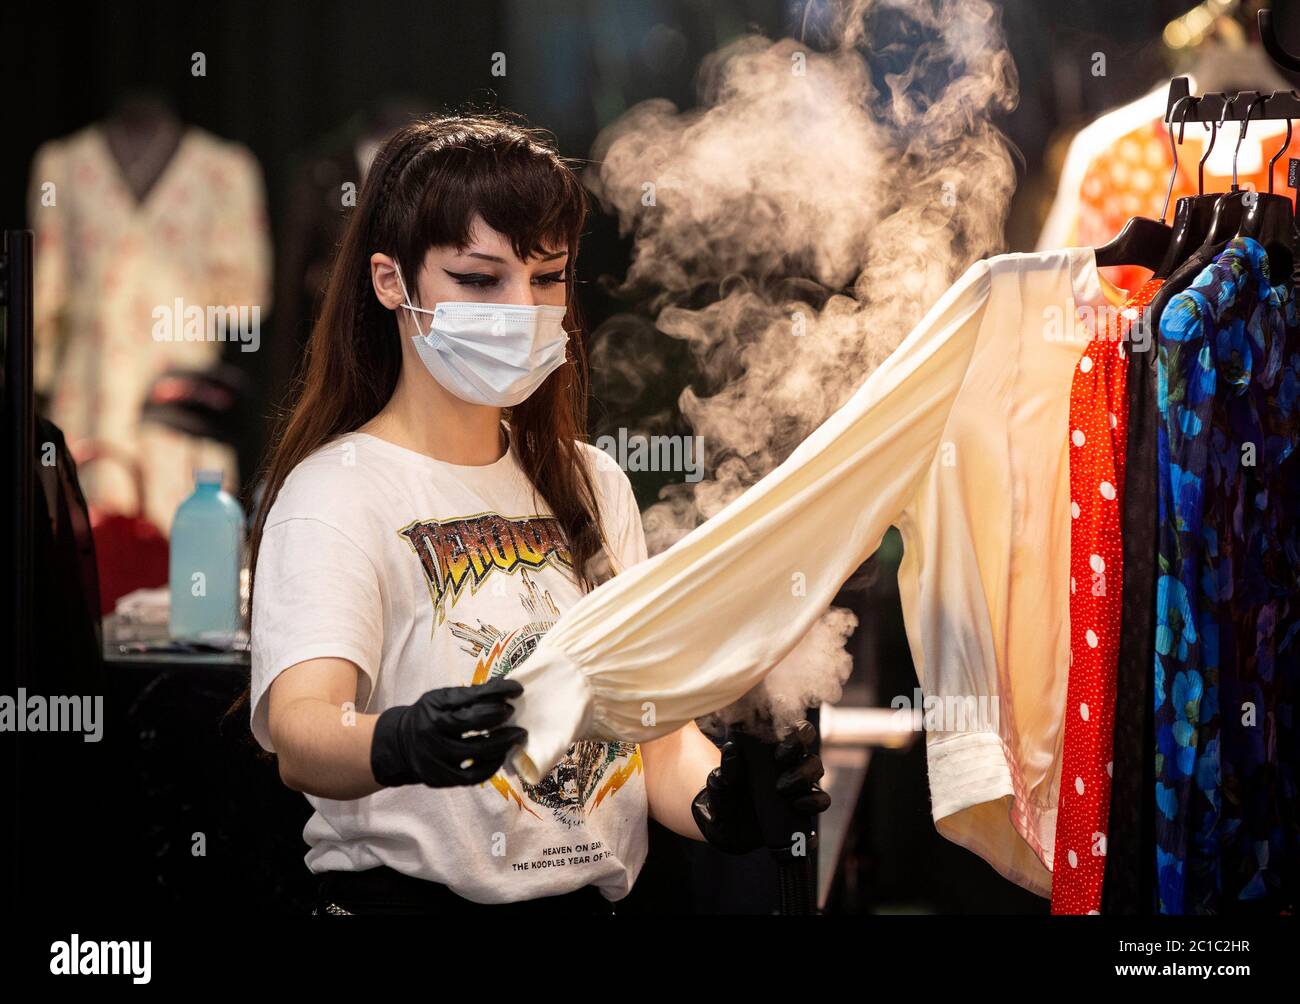 EDITORIAL USE ONLY Julia Teran, from The Kooples shop in Chelsea, steams clothes today as the area sees more than three quarters of its shops re-open after months of management planning. Stock Photo